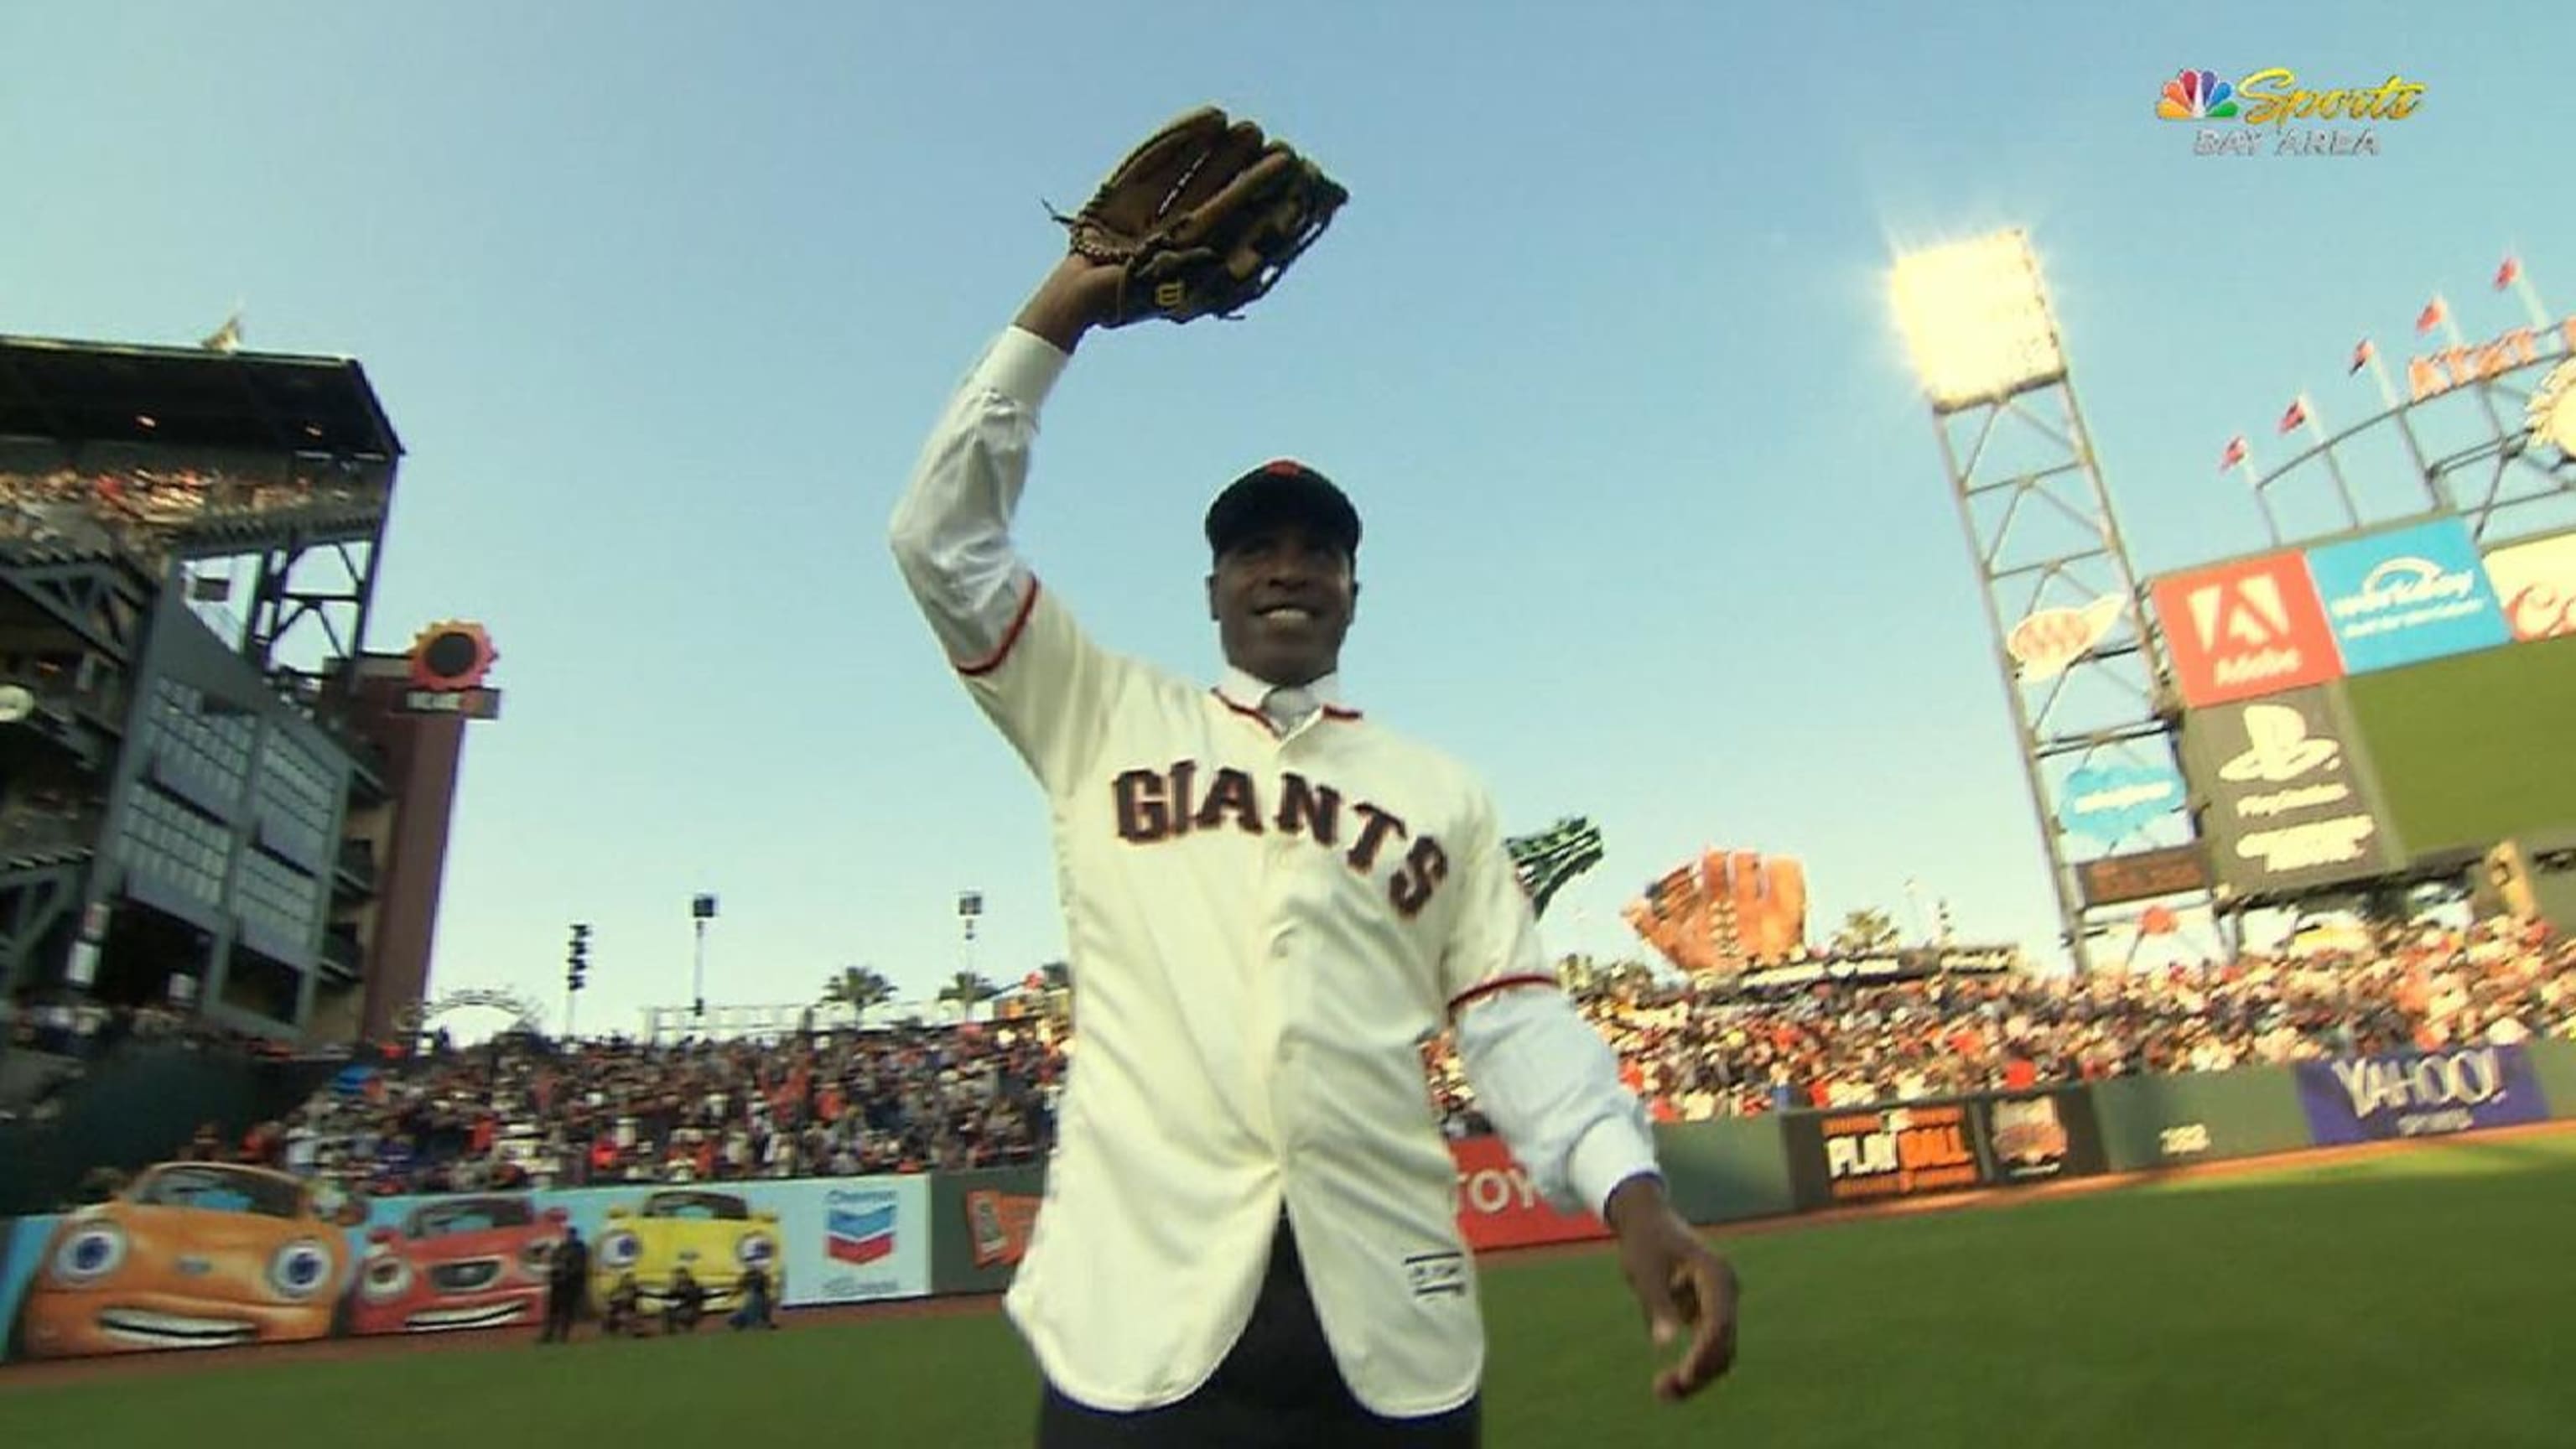 Bobby Bonds (25) of the San Francisco Giants is greeted by